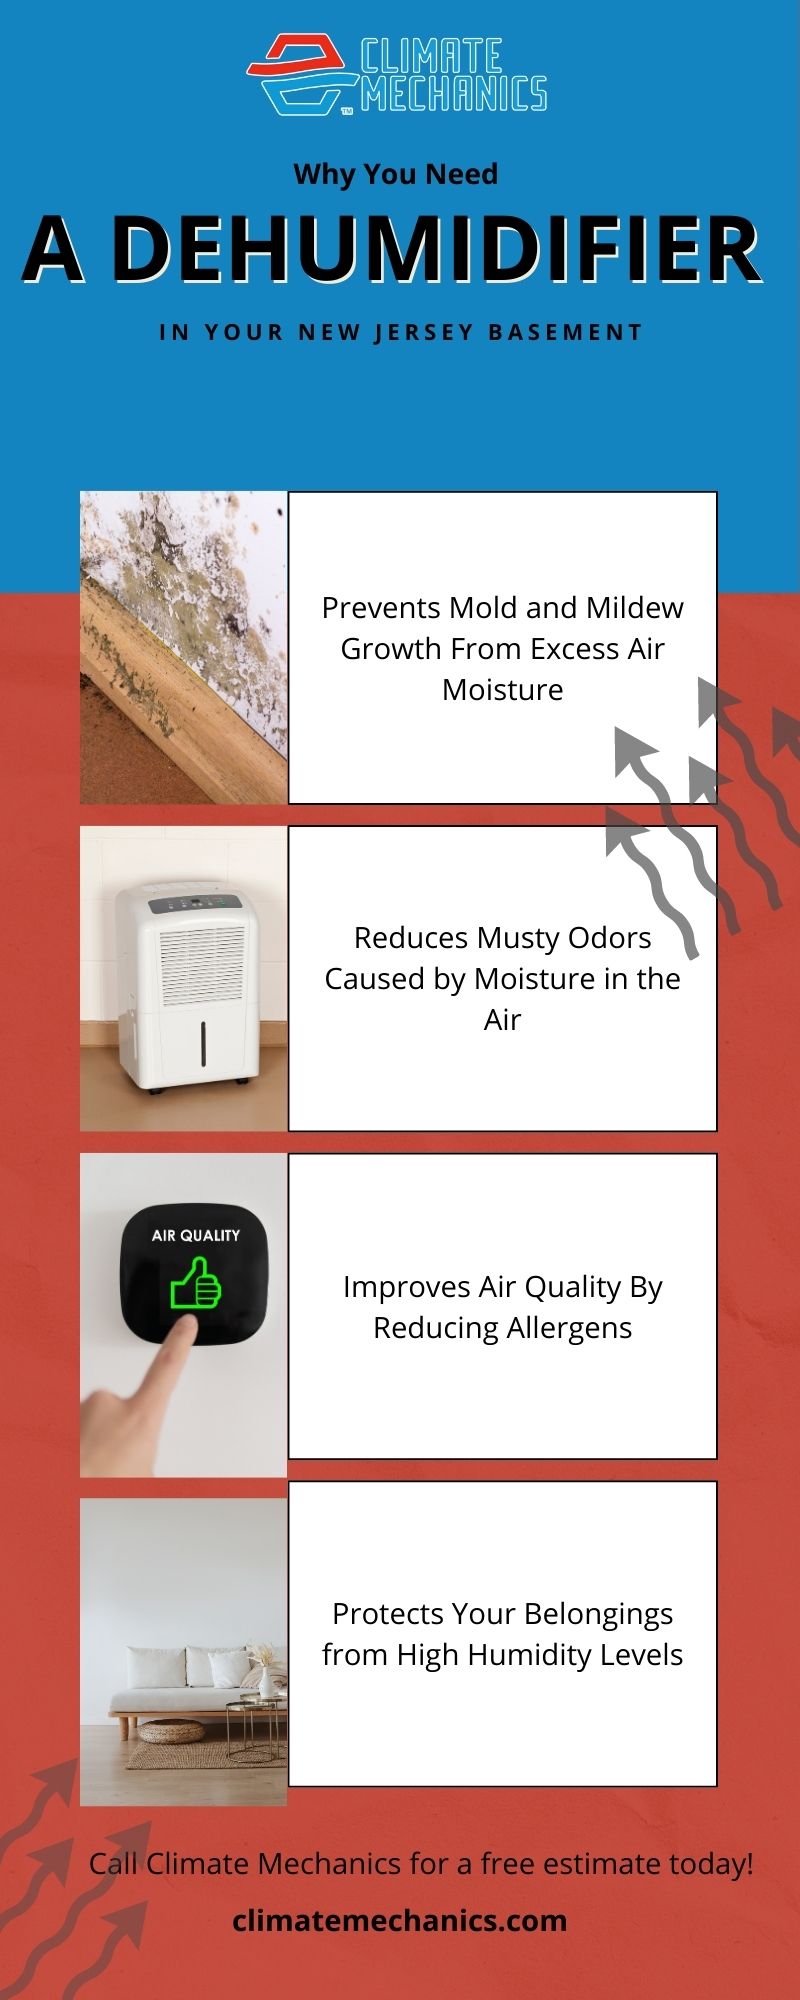 Infographic about why you need a dehumidifier in your New Jersey home.